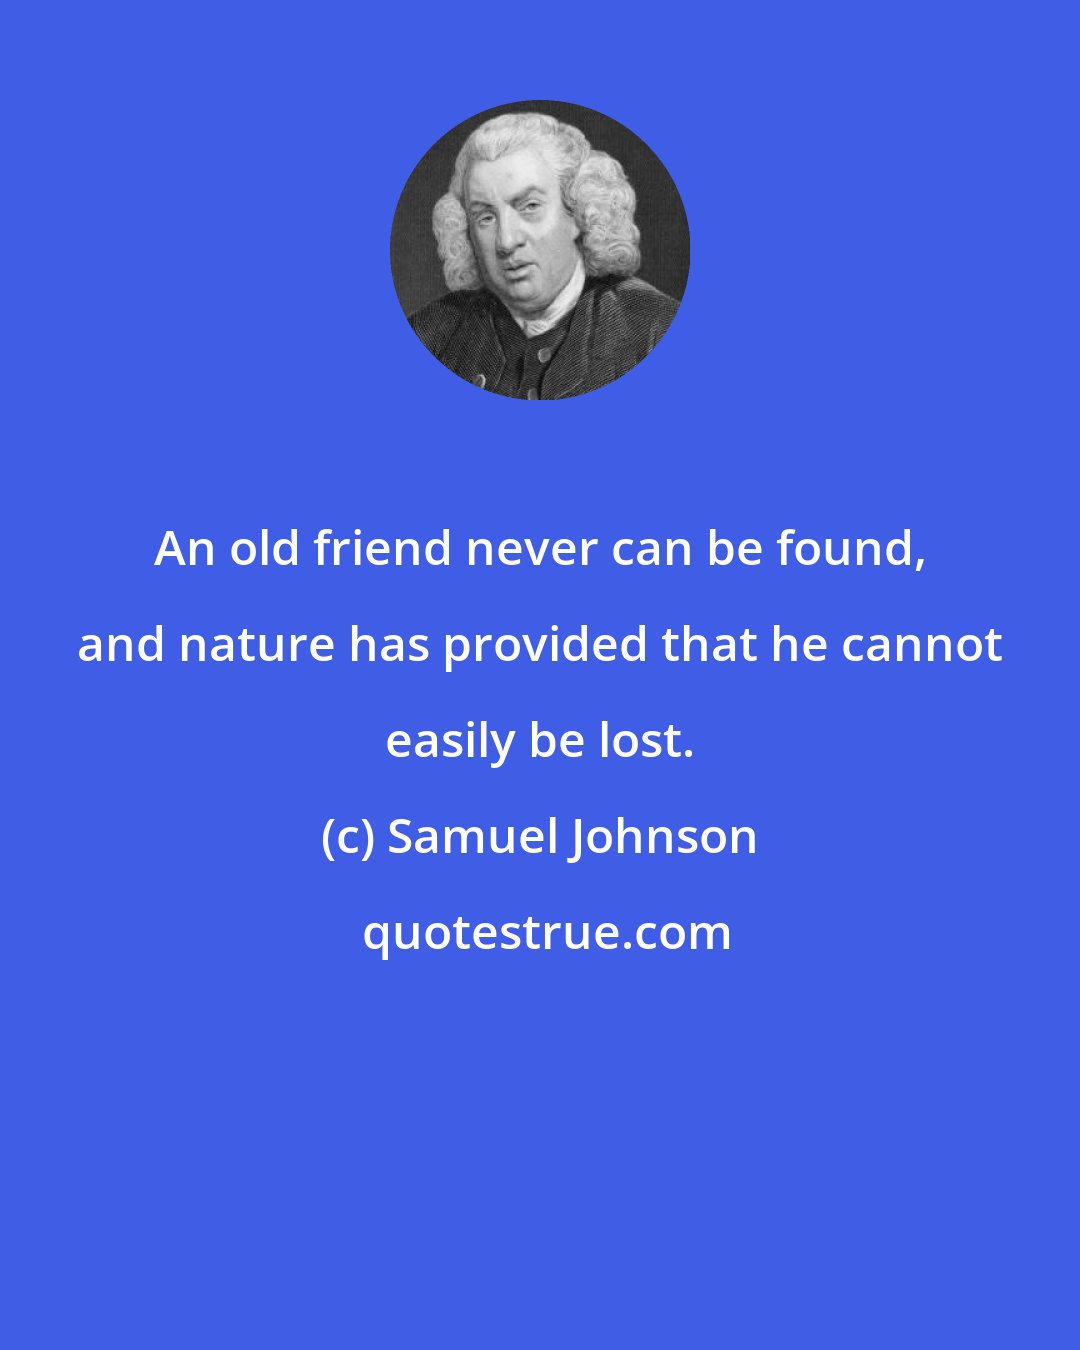 Samuel Johnson: An old friend never can be found, and nature has provided that he cannot easily be lost.